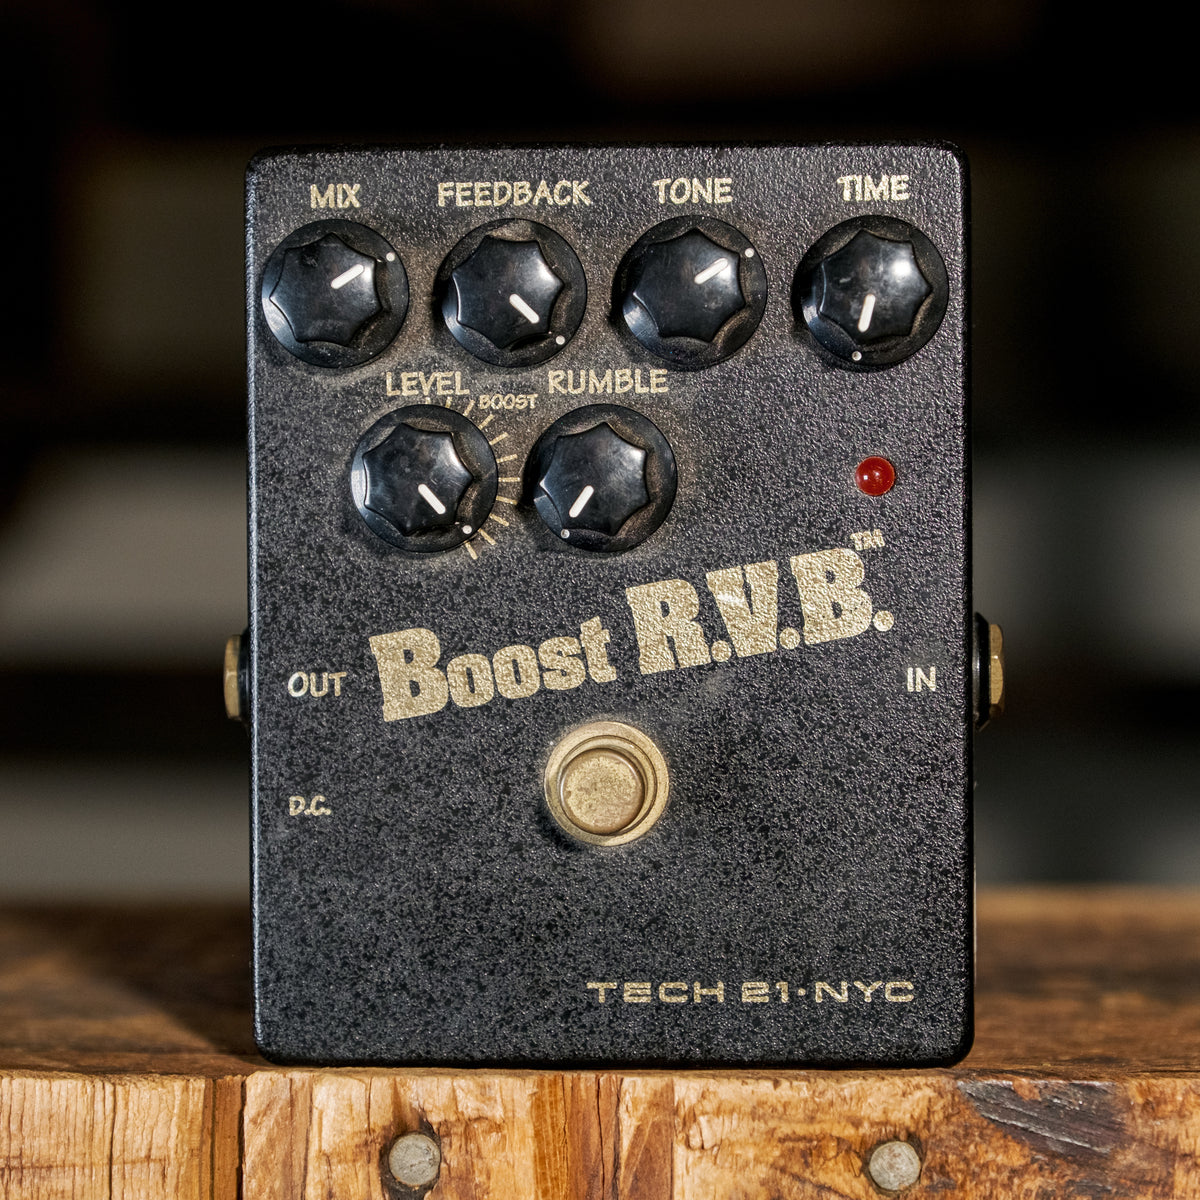 Tech 21 Boost RVB Reverb Emulator Pedal - Used Tech21 We will work